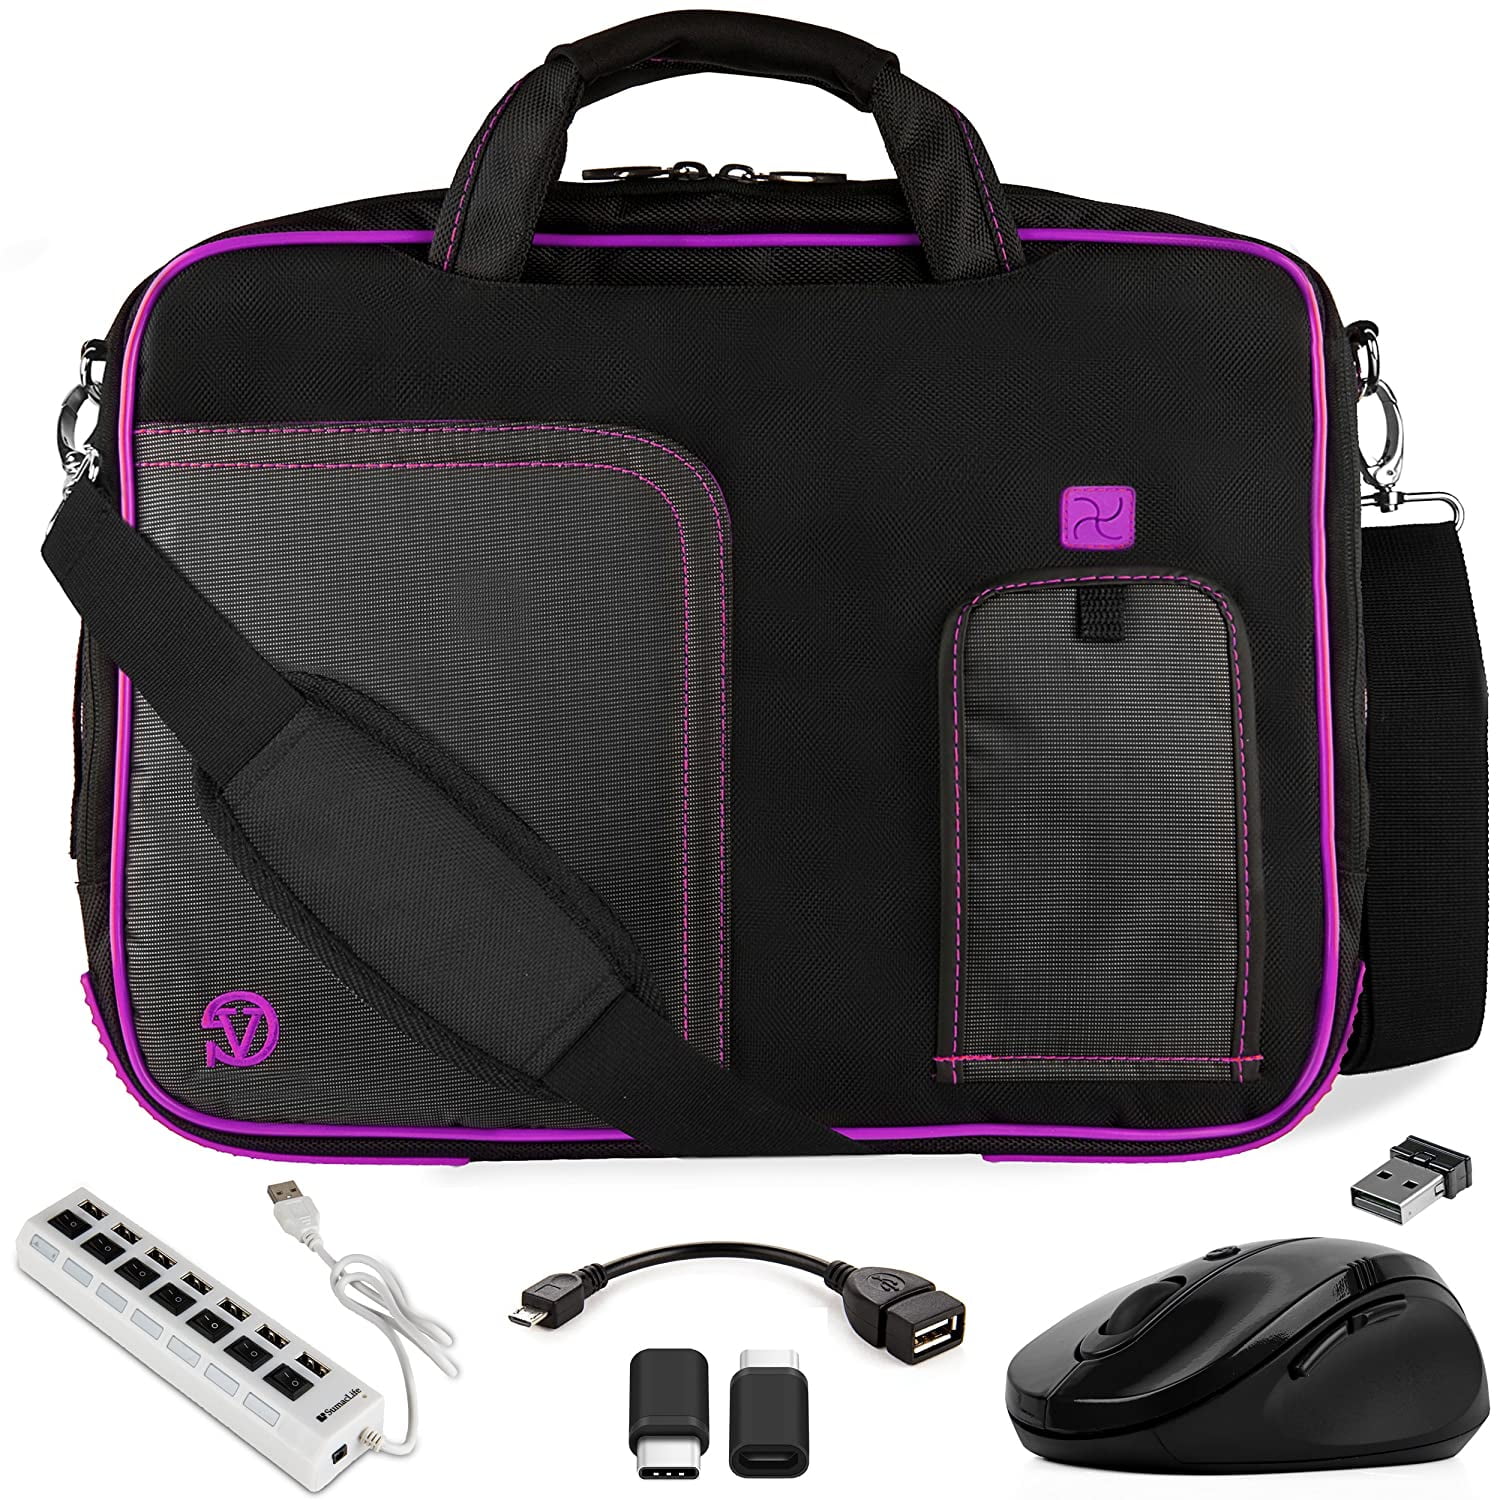 Purple Anti-Theft Laptop Messenger Bag HDMI Cable for Apple MacBook Pro 15 inch USB Hub Mouse 